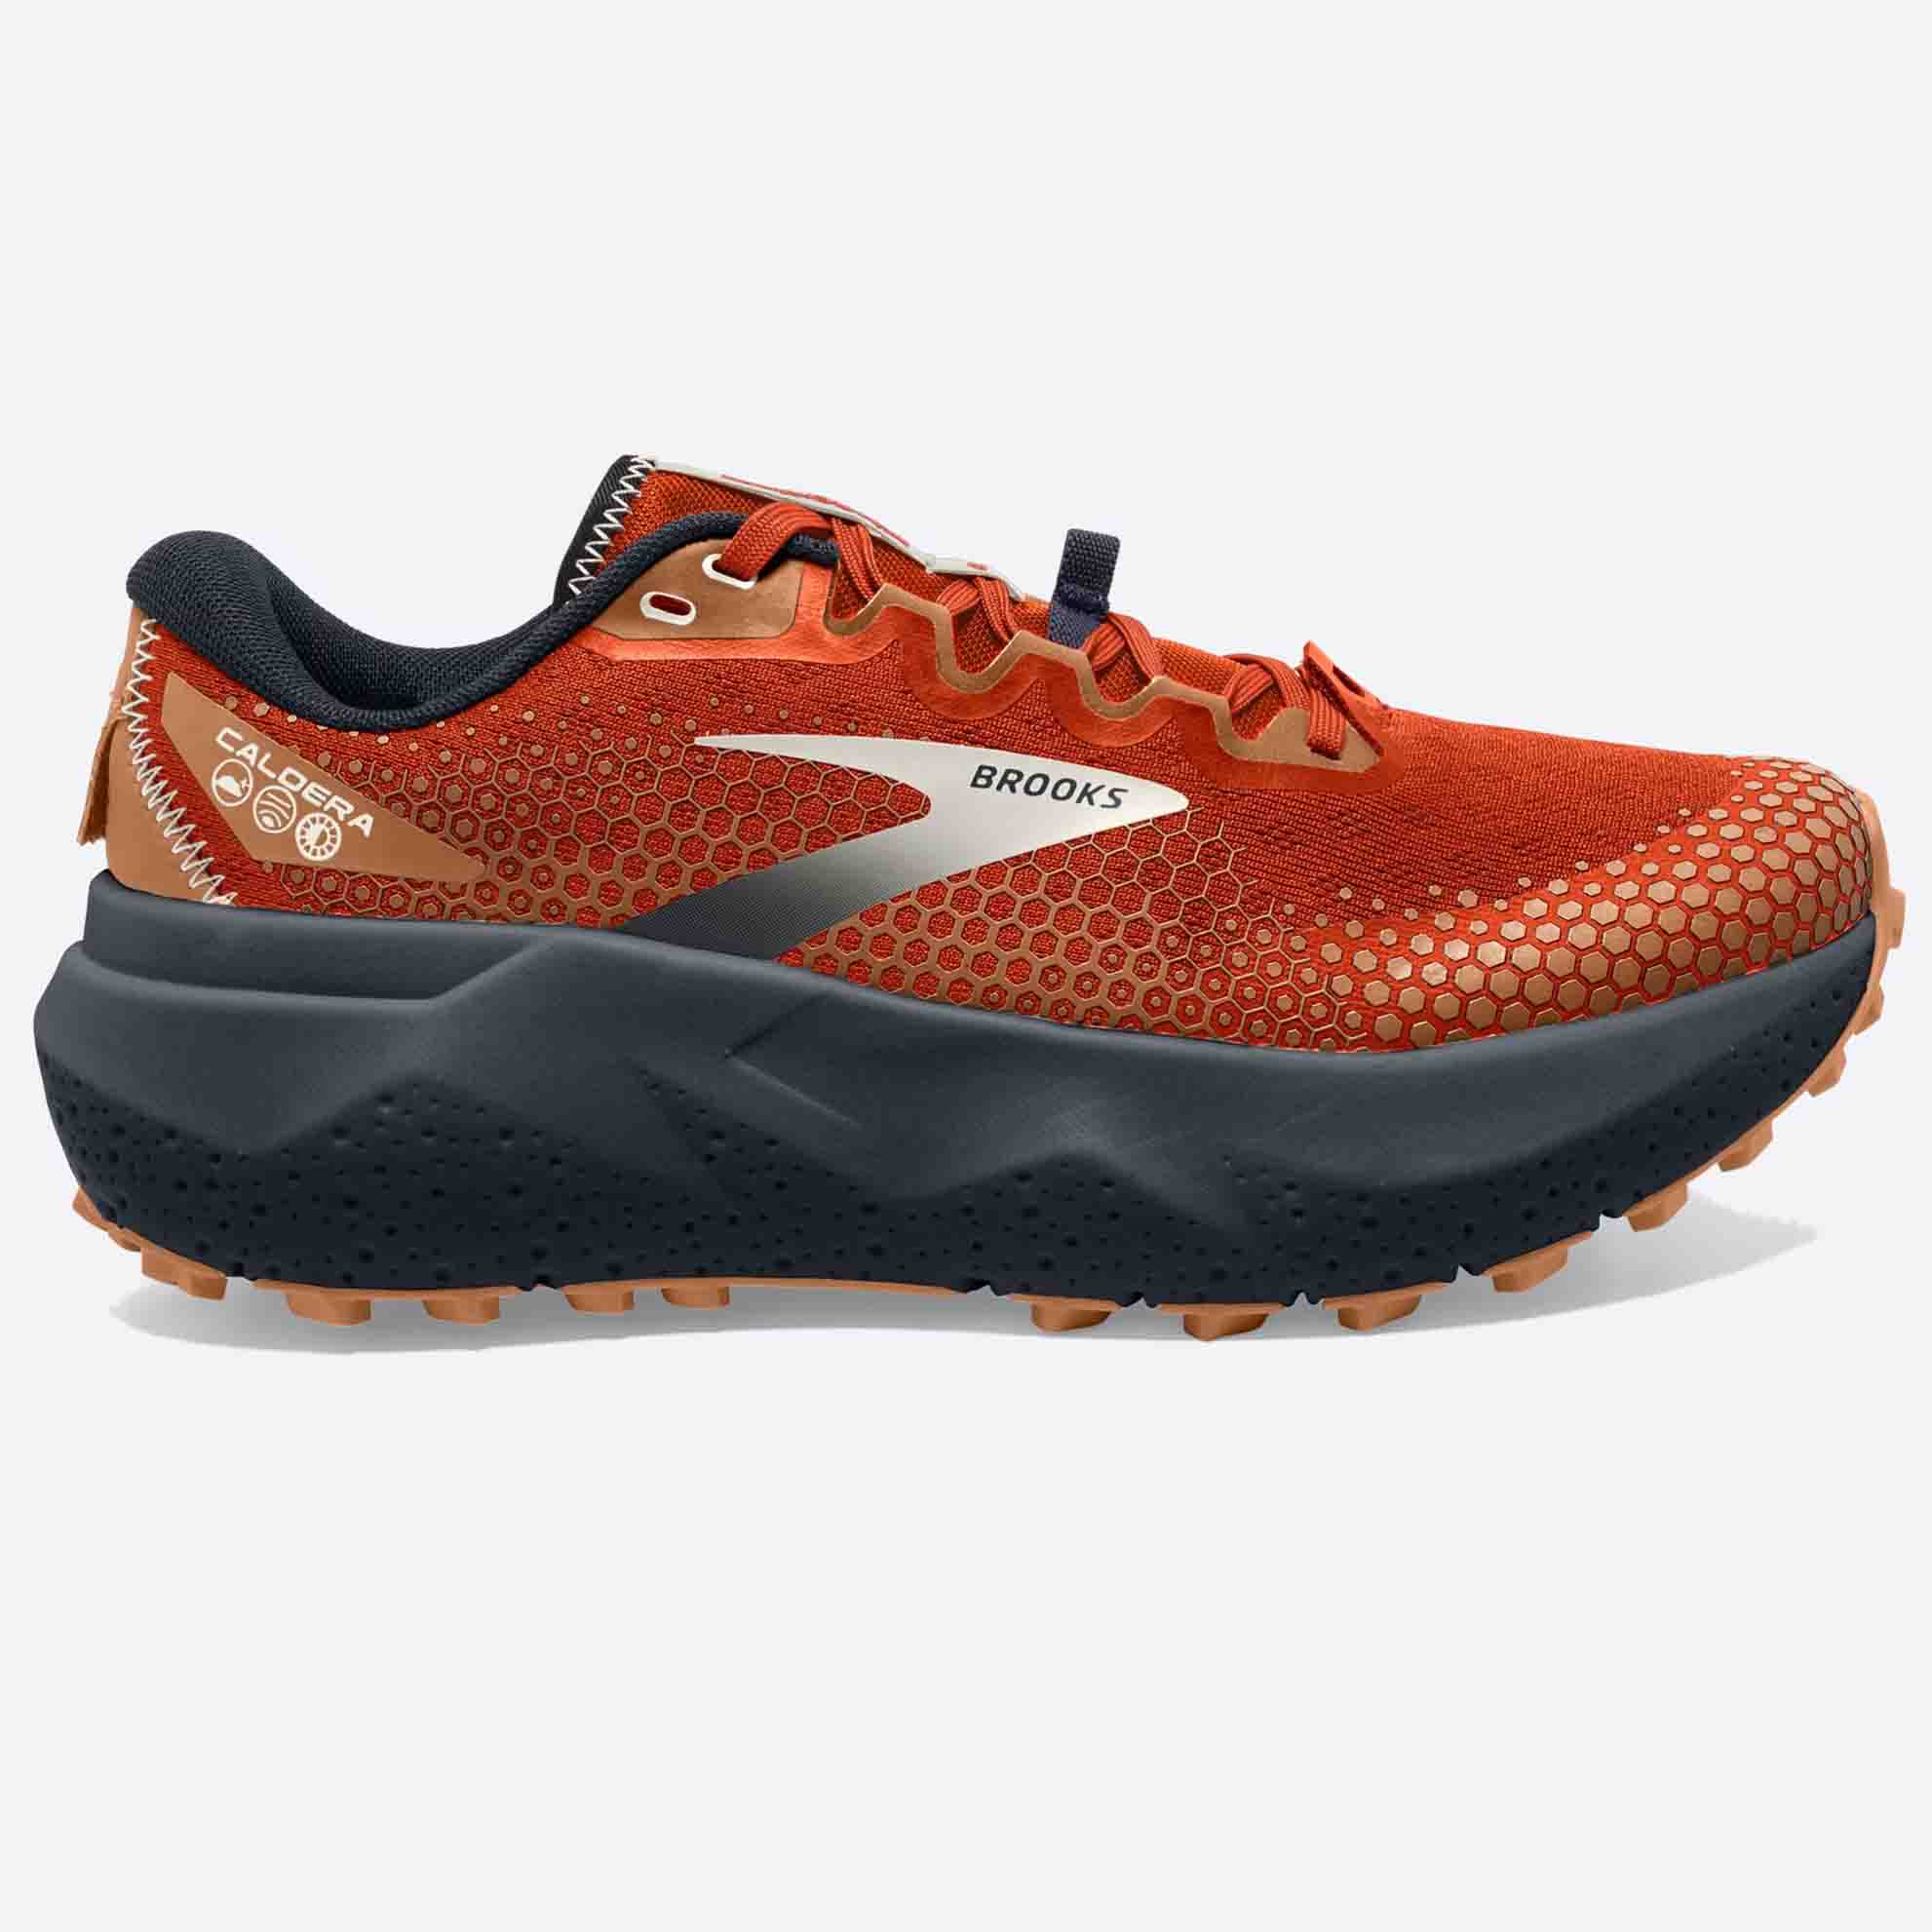 Caldera 6 Trail Shoes in orange with cushioning 